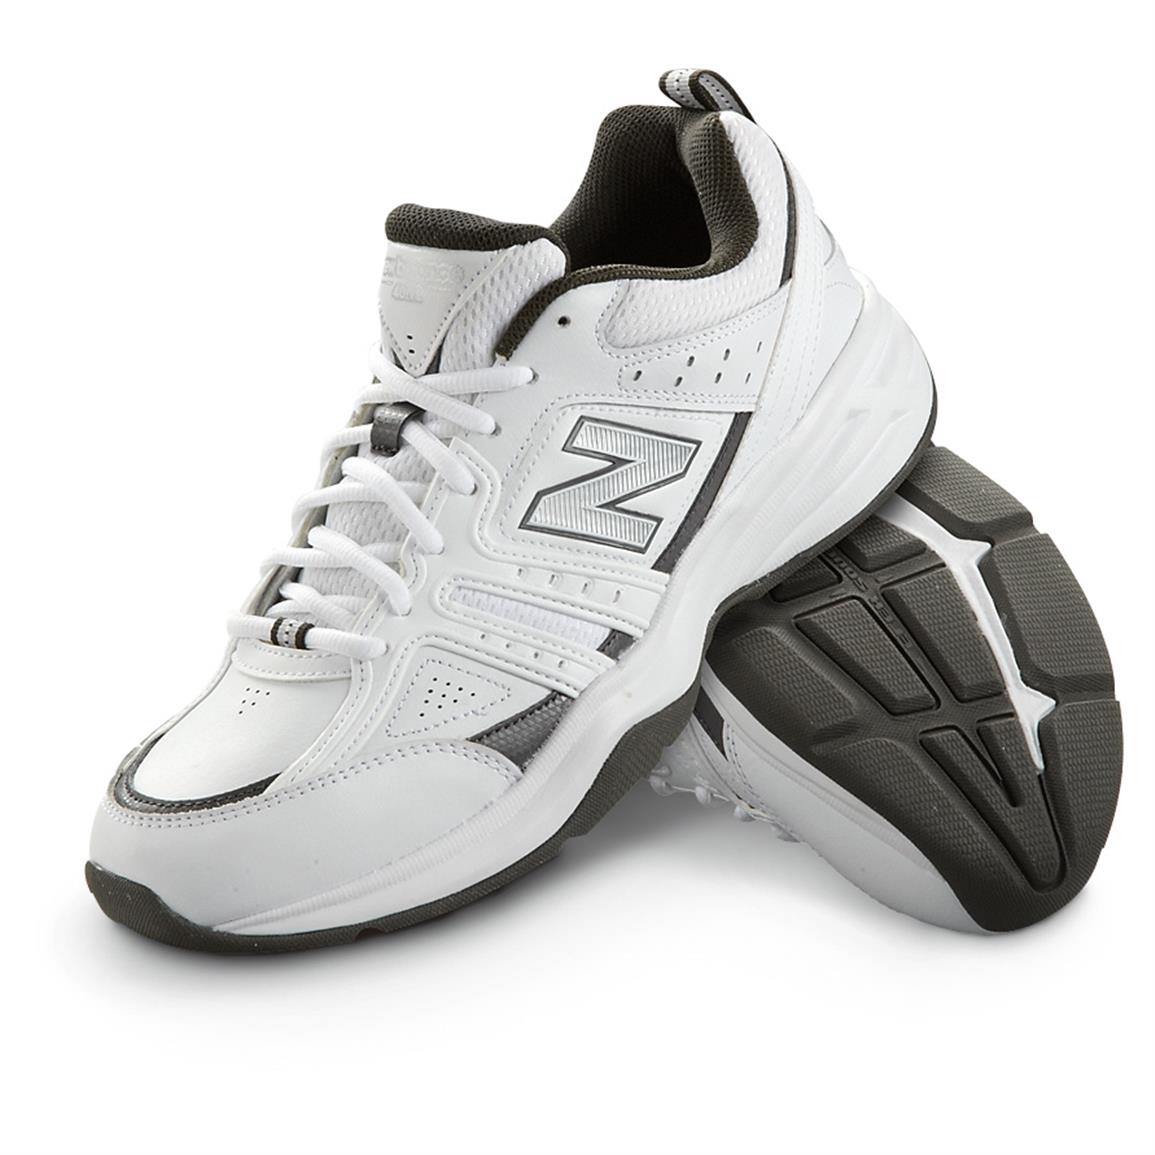 New Balance 401v2 Running Shoes - 625964, Running Shoes & Sneakers at ...